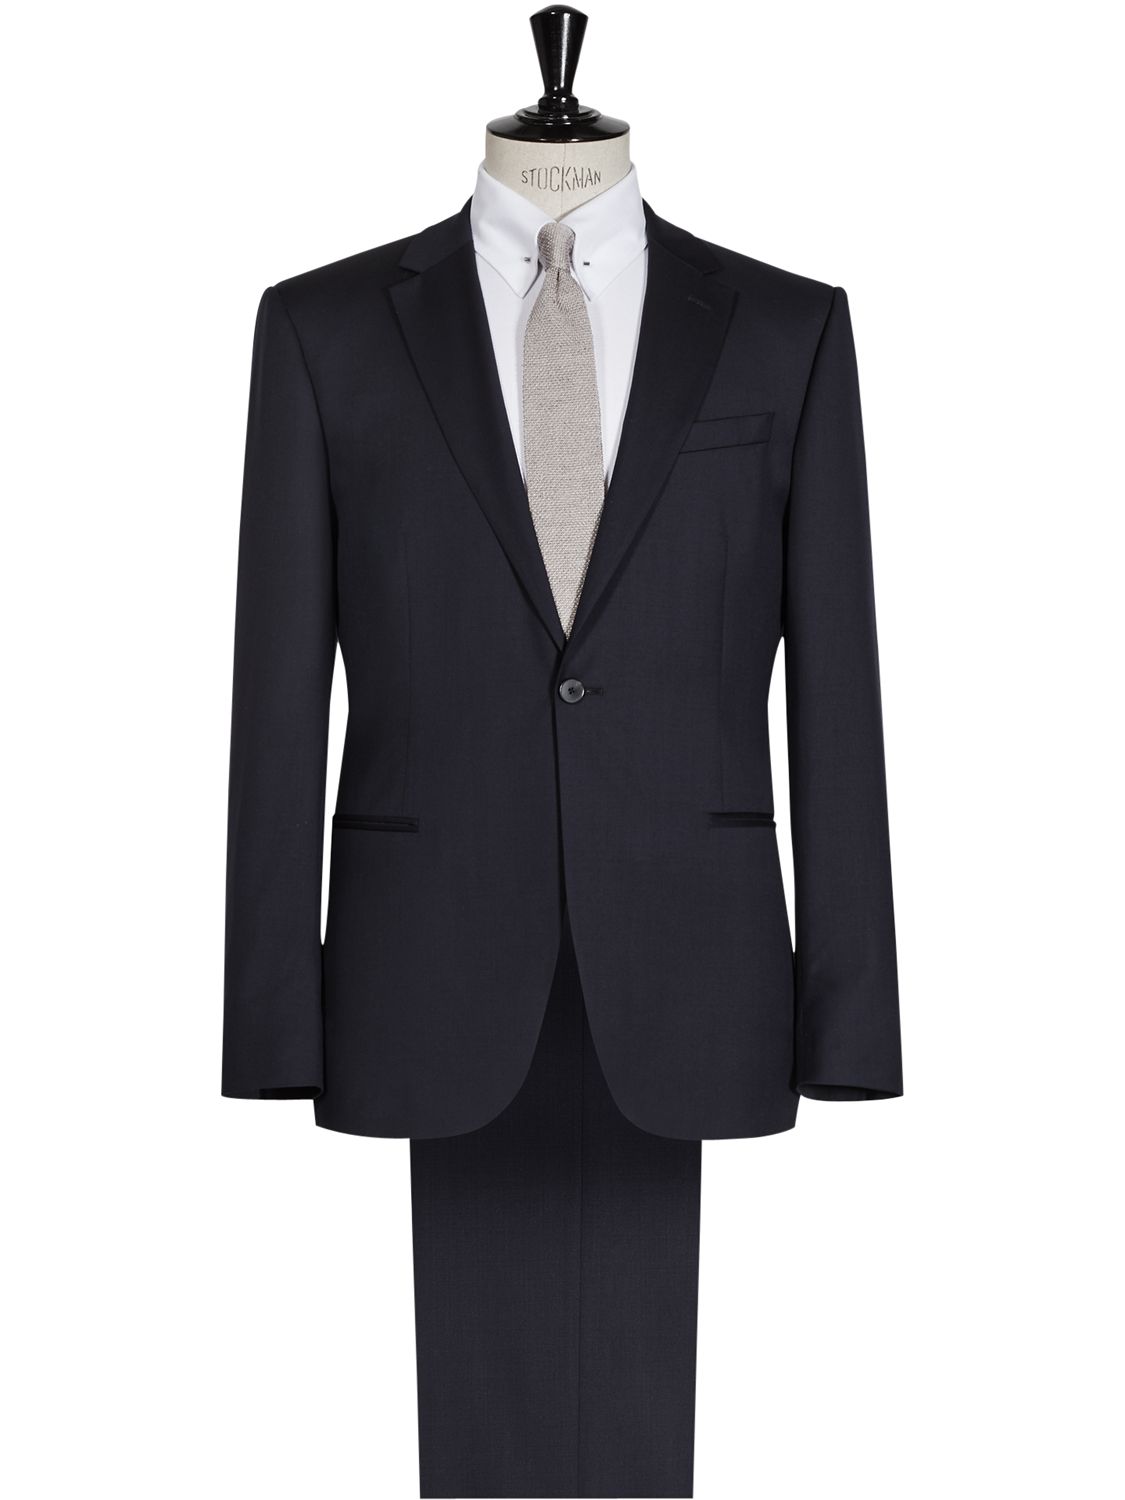 Reiss Marcello Modern Fit Wool Suit, Navy